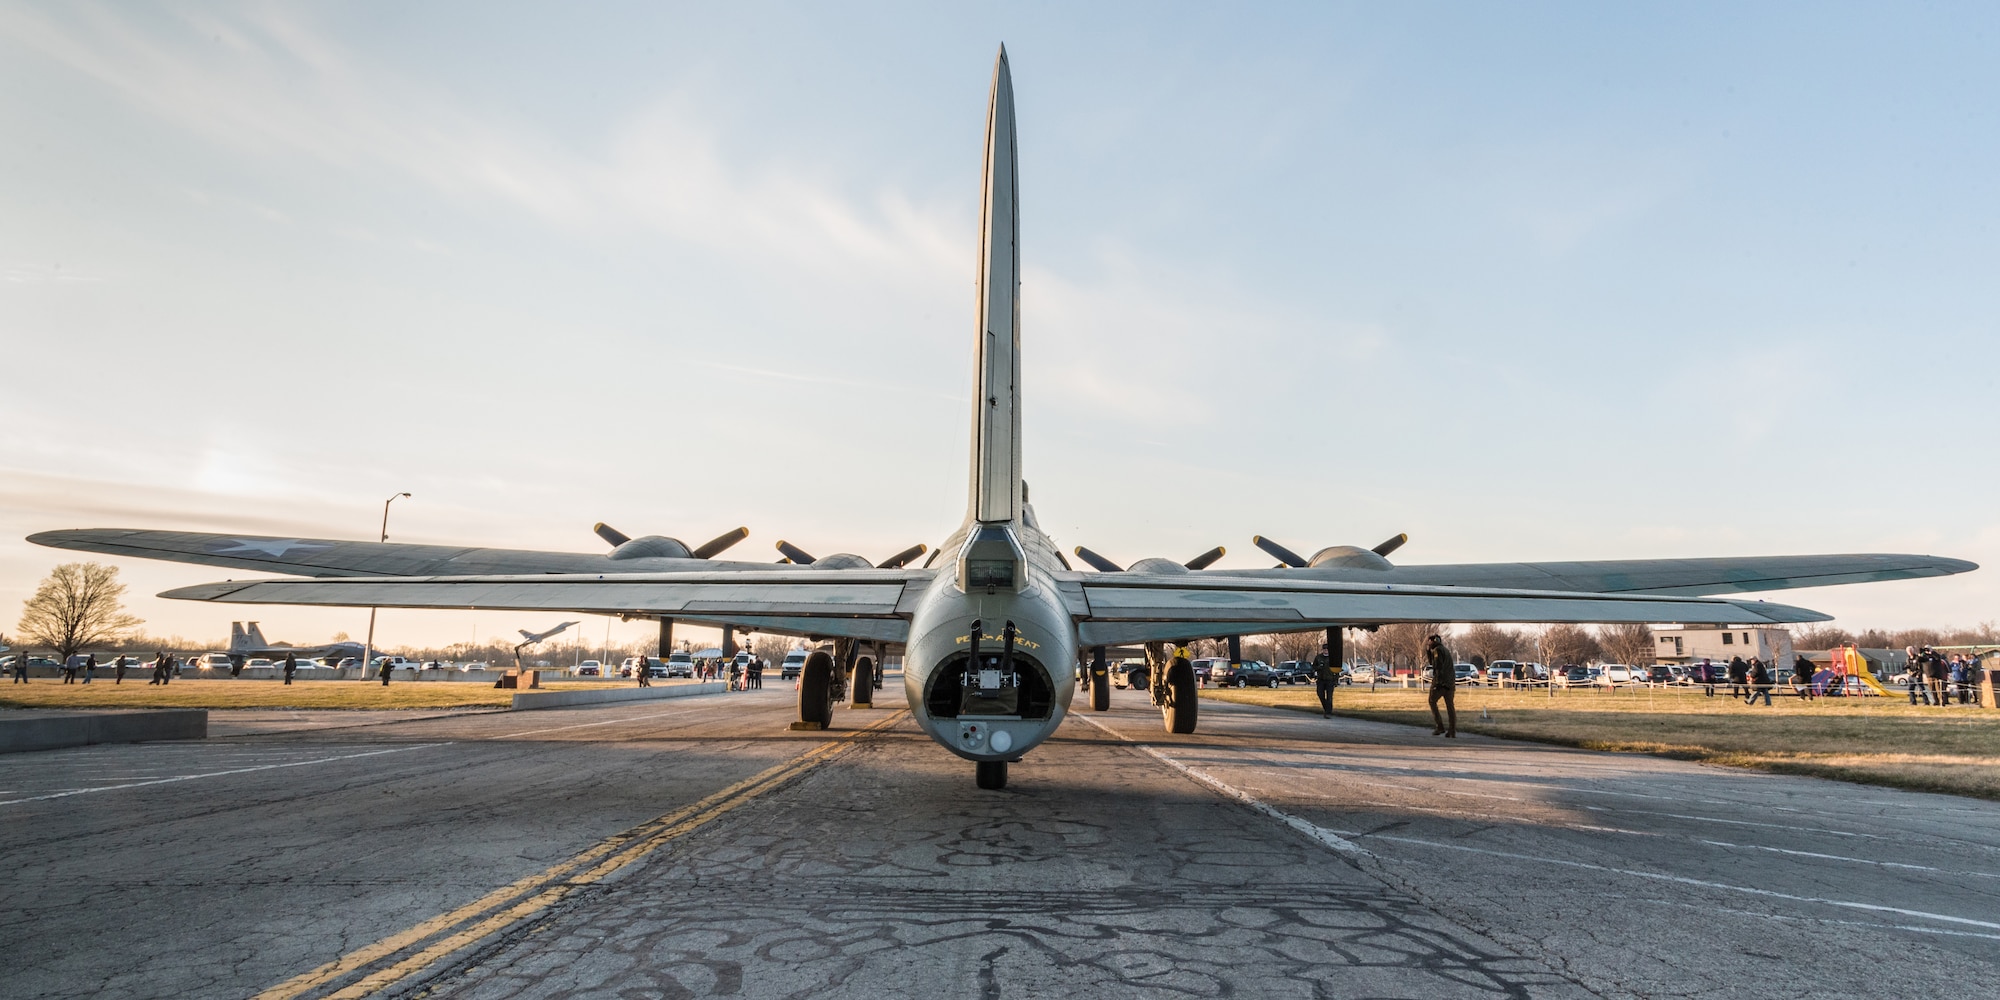 (03/14/2018) -- The B-17F Memphis Belle poses for photos before moving into the WWII Gallery at the National Museum of the United States Air Force on March 14, 2018. Plans call for the aircraft to be placed on permanent public display in the WWII Gallery here at the National Museum of the U.S. Air Force on May 17, 2018. (U.S. Air Force photo by Kevin Lush)